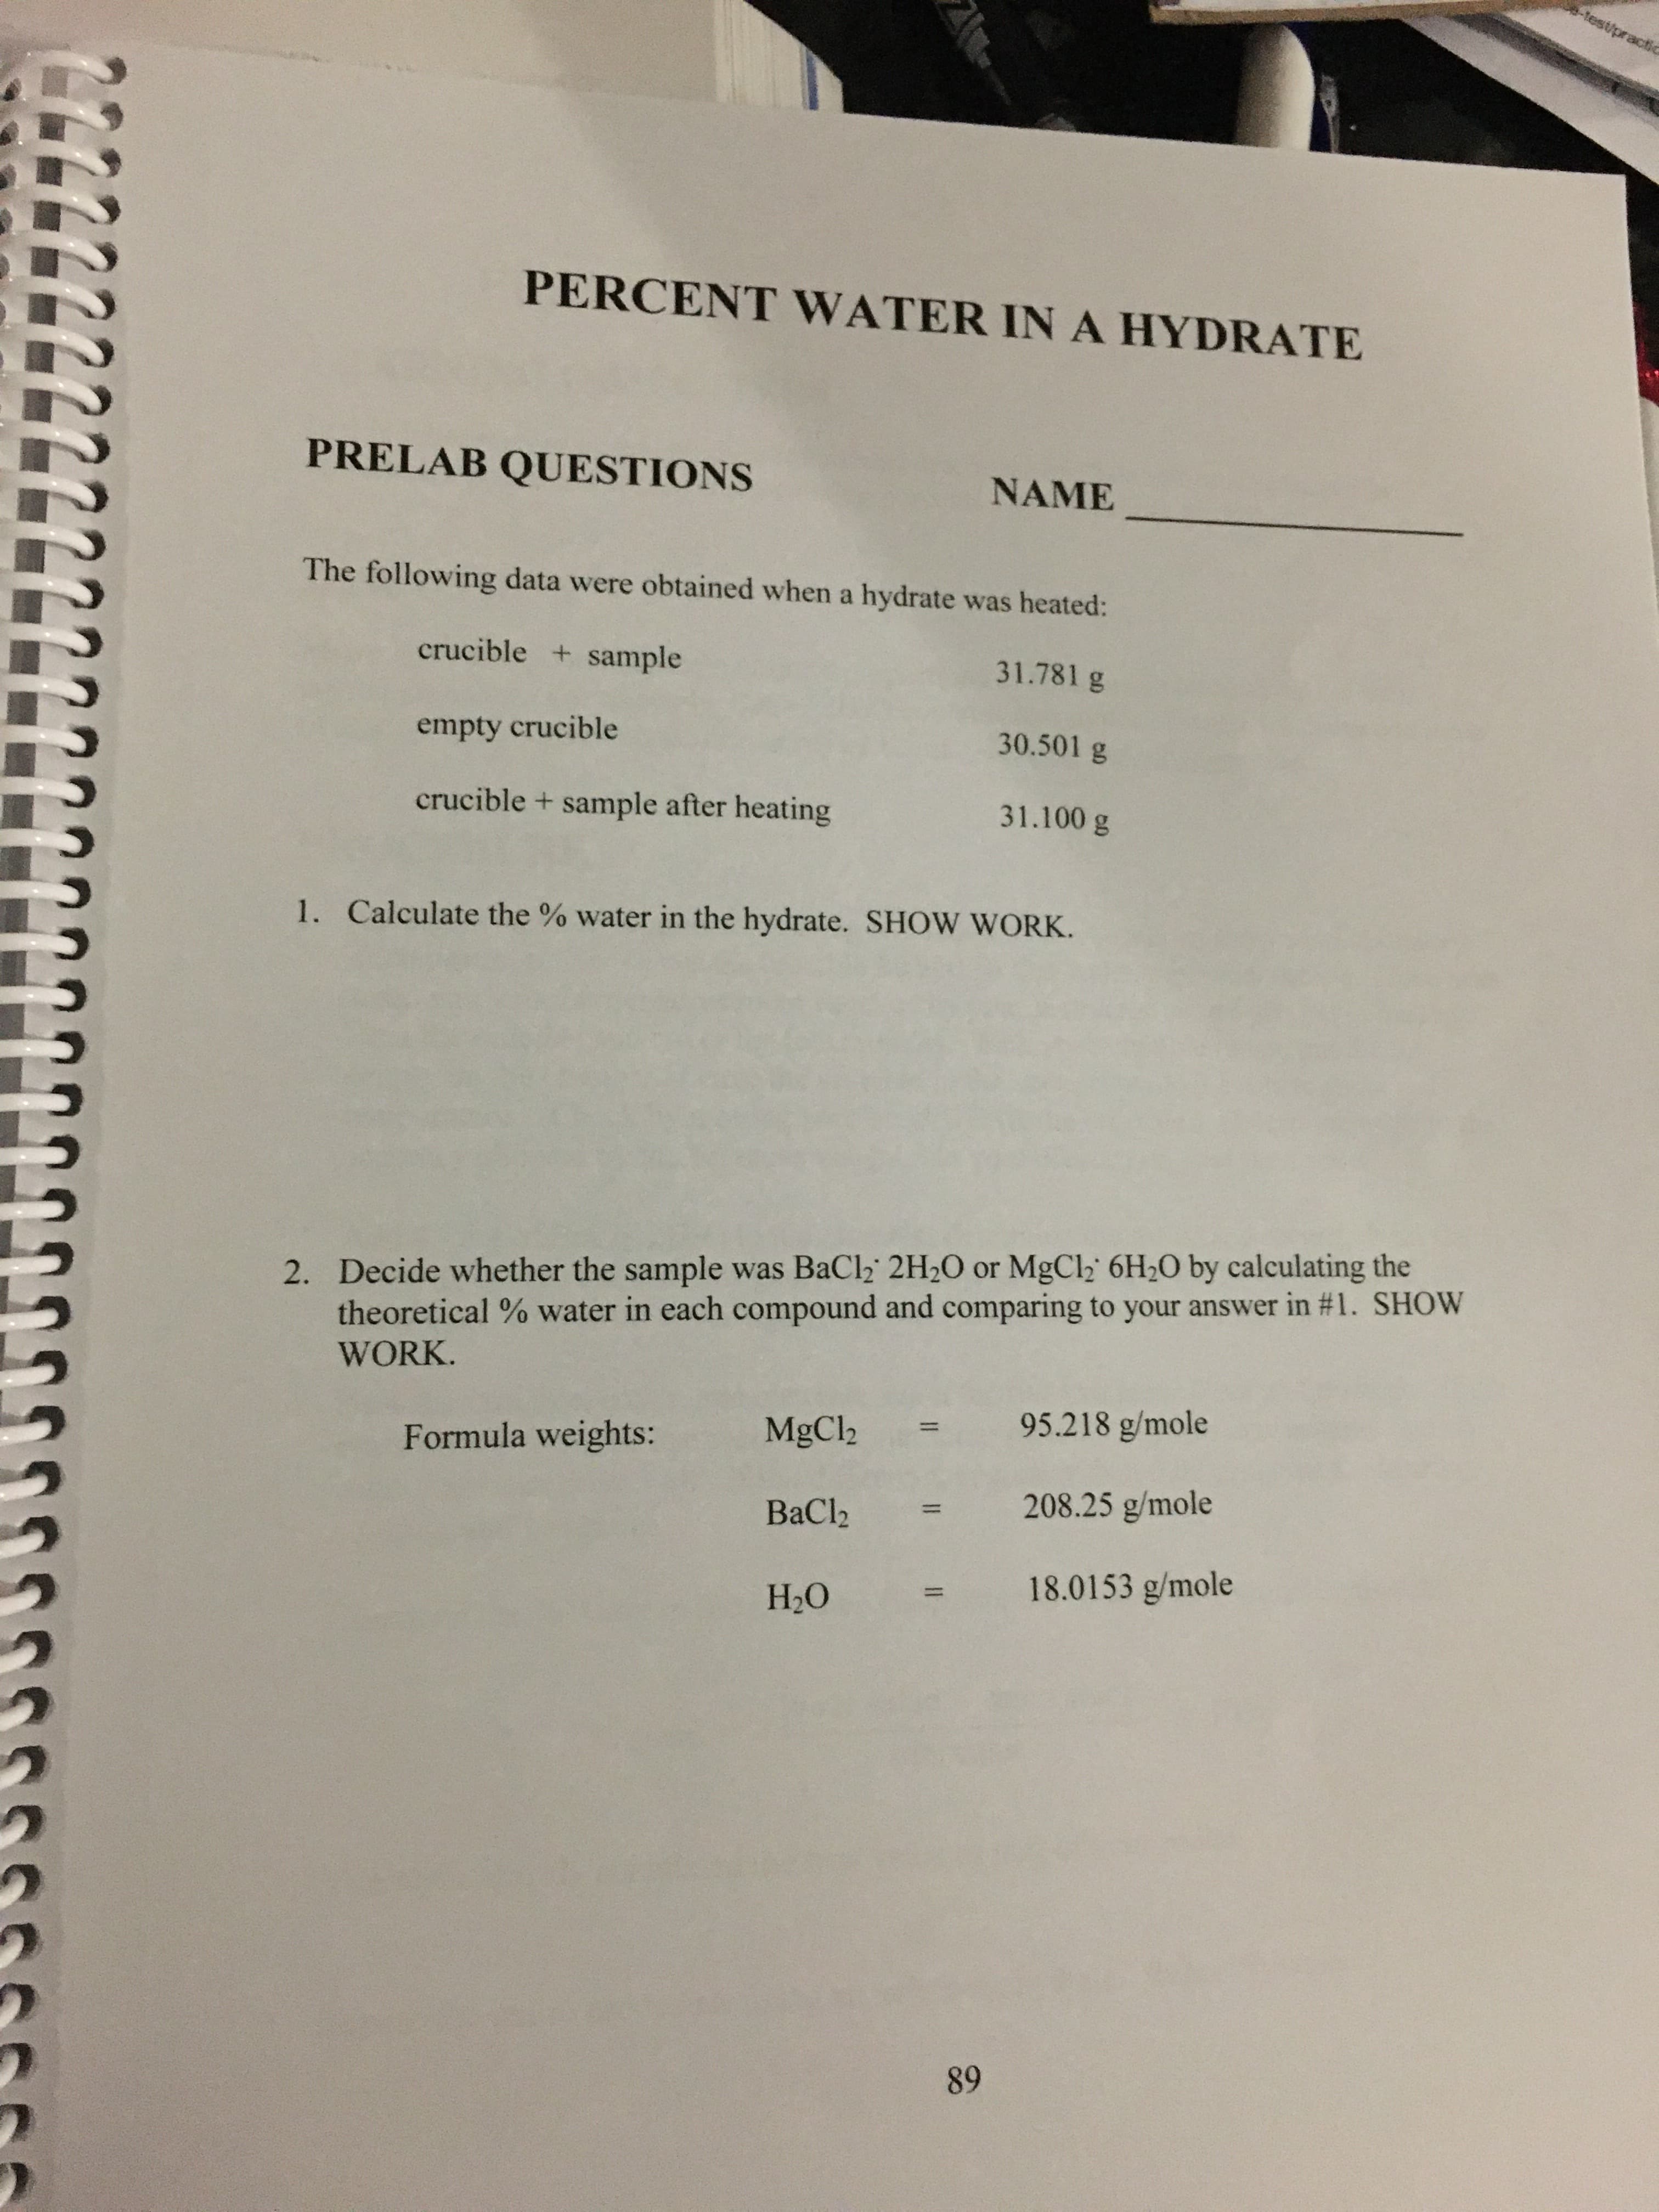 -test/practic
PERCENT WATER IN A HYDRATE
PRELAB QUESTIONS
NAME
The following data were obtained when a hydrate was heated:
crucible + sample
31.781 g
30.501 g
empty crucible
31.100 g
crucible + sample after heating
1. Calculate the % water in the hydrate. SHOW WORK.
Decide whether the sample was BaCl2 2H2O or MgCl2 6H20 by calculating the
theoretical % water in each compound and comparing to your answer in #1. SHOW
2.
WORK.
95.218 g/mole
MgCl2
11
Formula weights:
208.25 g/mole
ВаClz
18.0153 g/mole
Н-О
89
II
II
